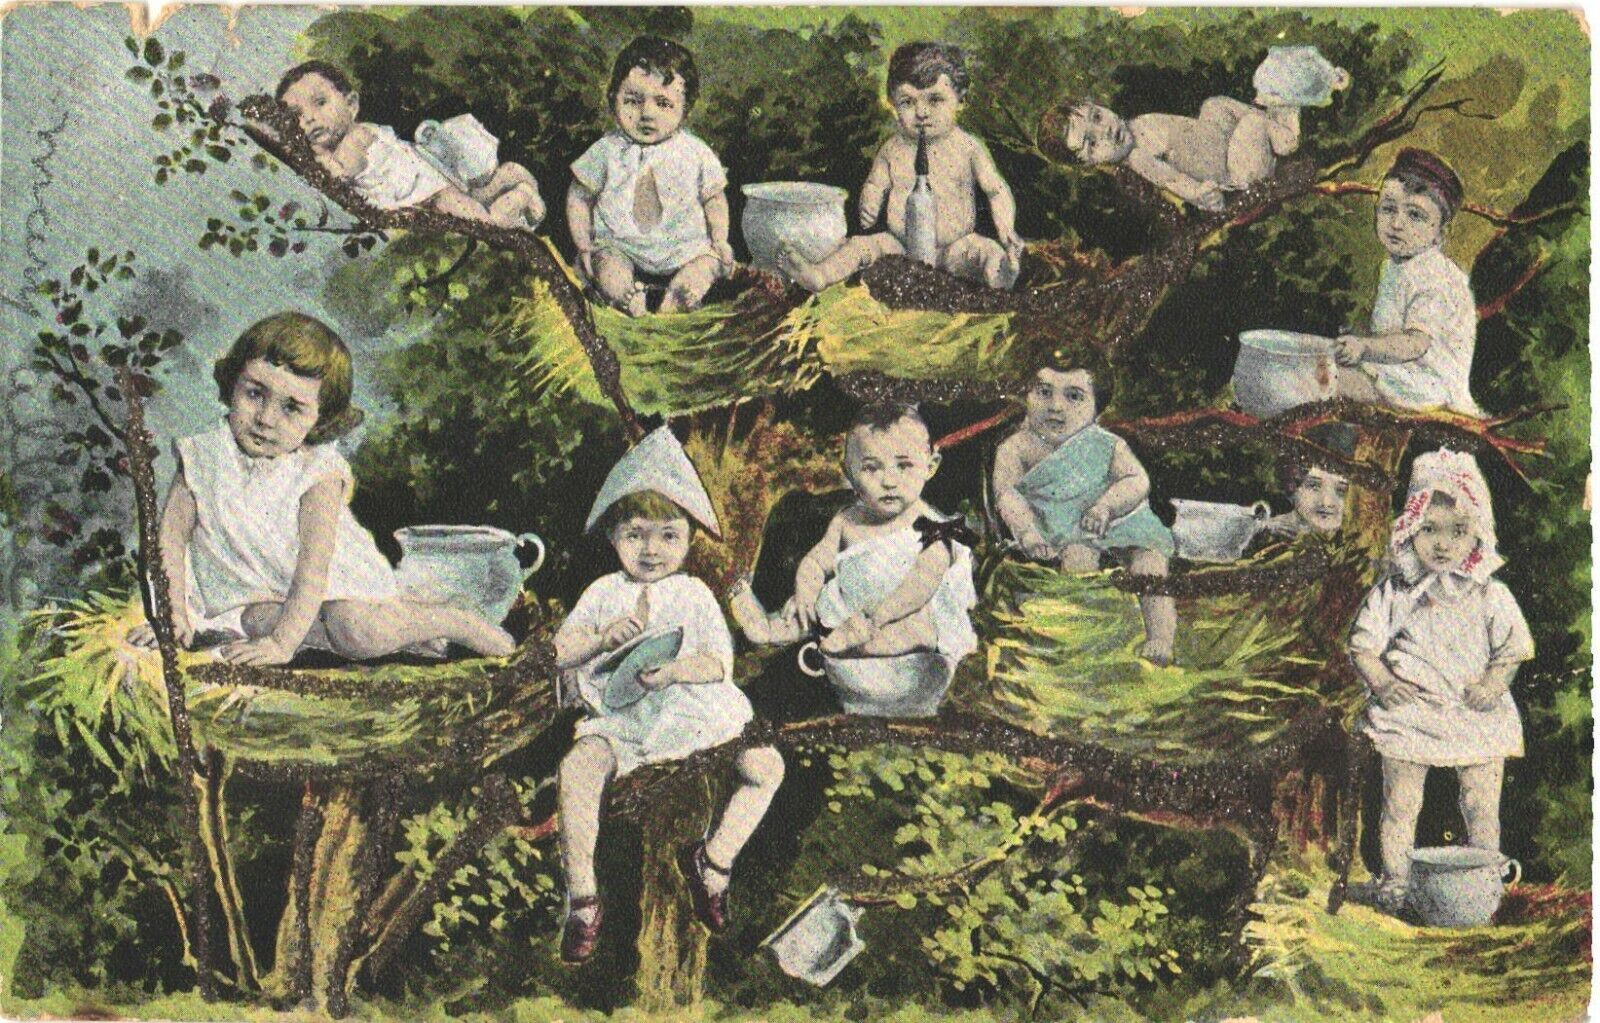 Painting of Adorable Babies With Their Chamber Pots On Nests And Tree Postcard